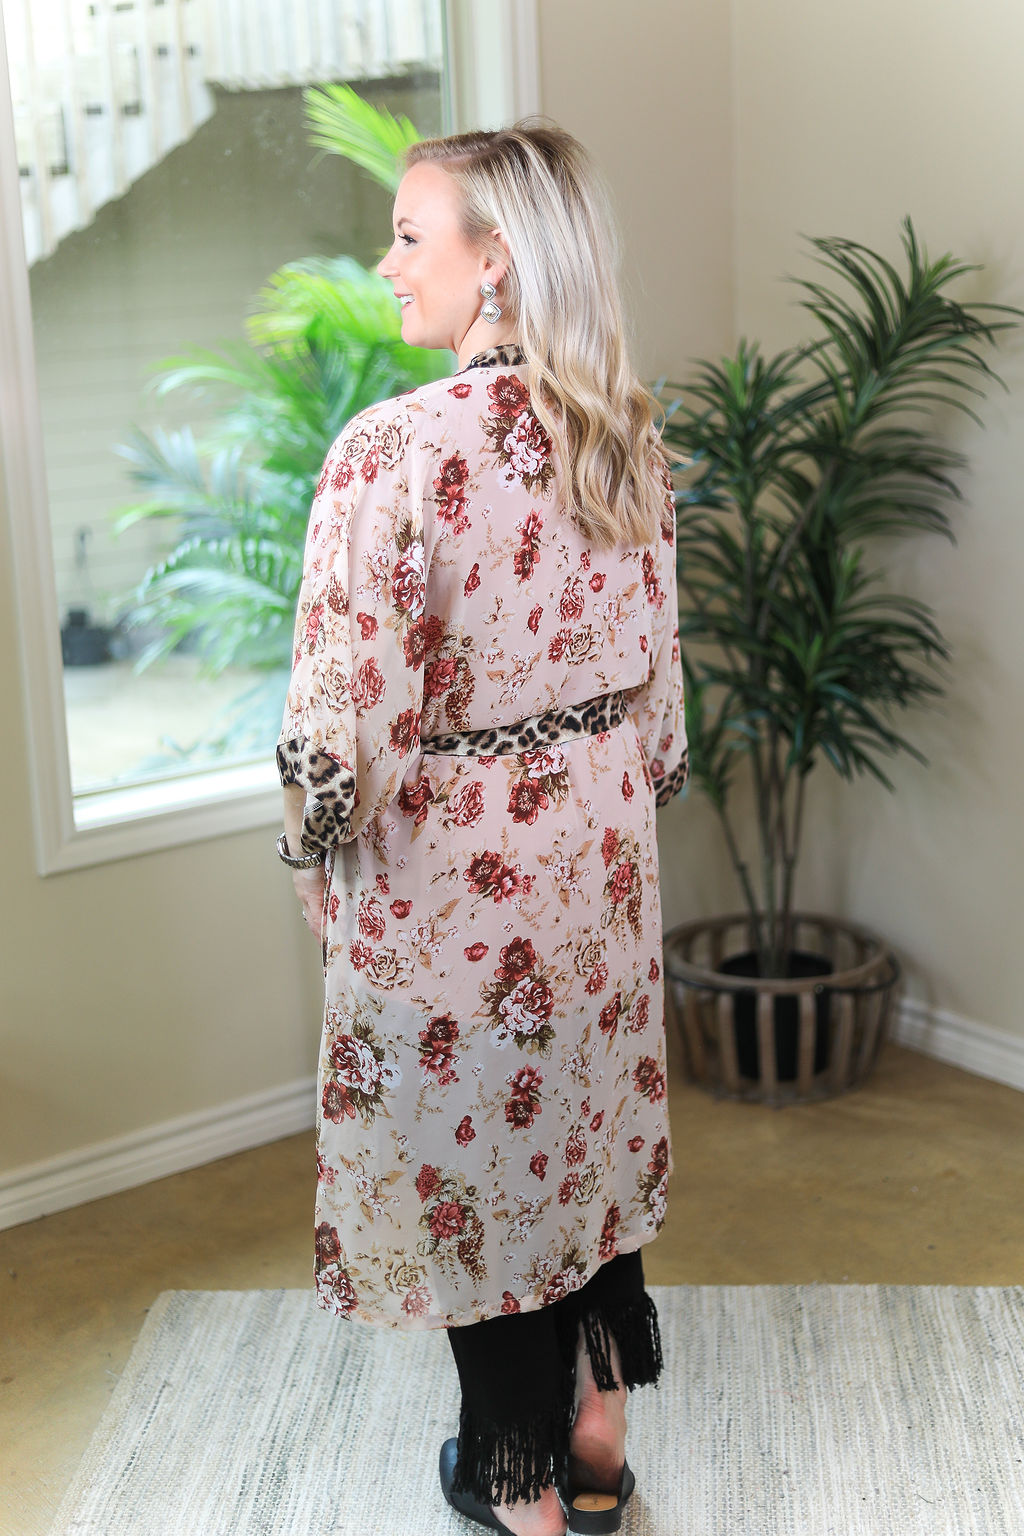 Last Chance Size Small | On My Mind Sheer Floral Print Kimono with Leopard Print Trim in Ivory - Giddy Up Glamour Boutique